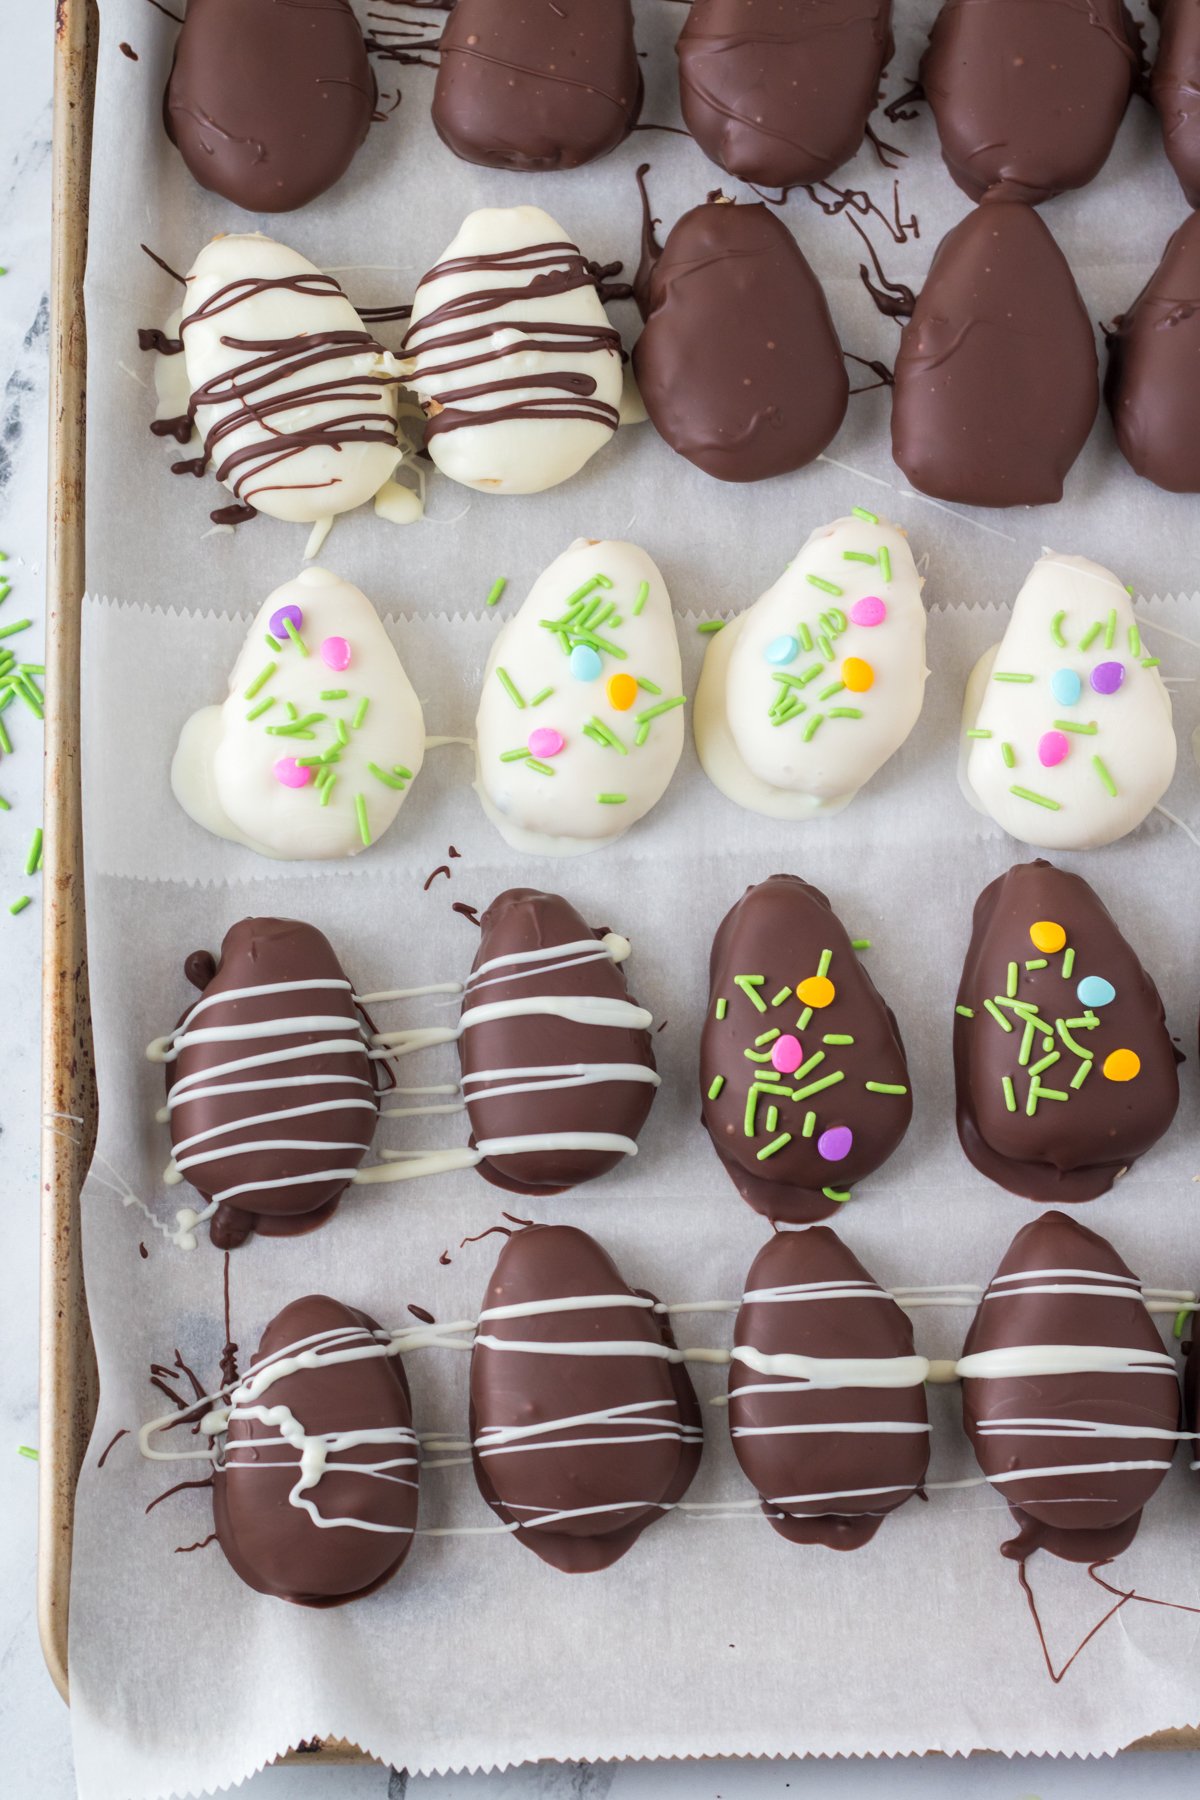 chocolate covered peanut butter eggs on a baking sheet